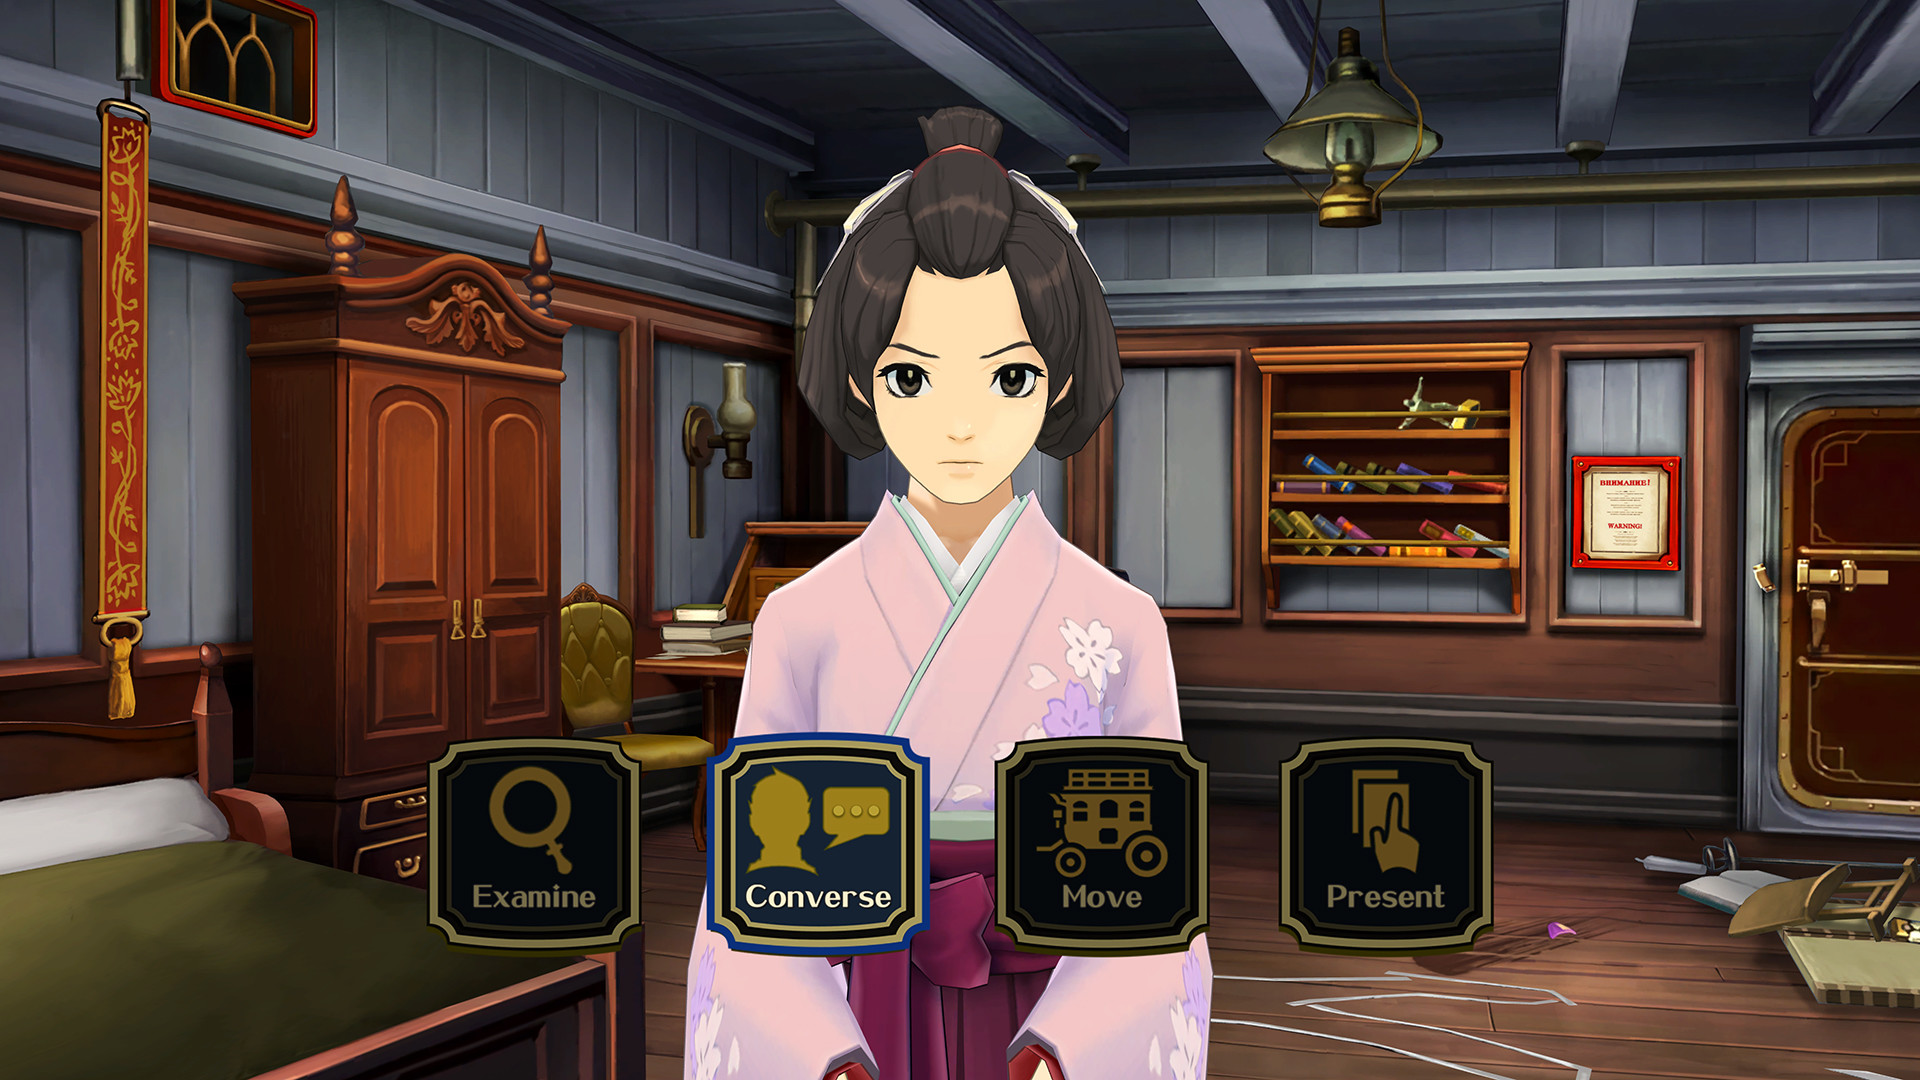 Screenshot of a woman with brown hair in a pink kimono standing in front of the camera with the converse option highlighted